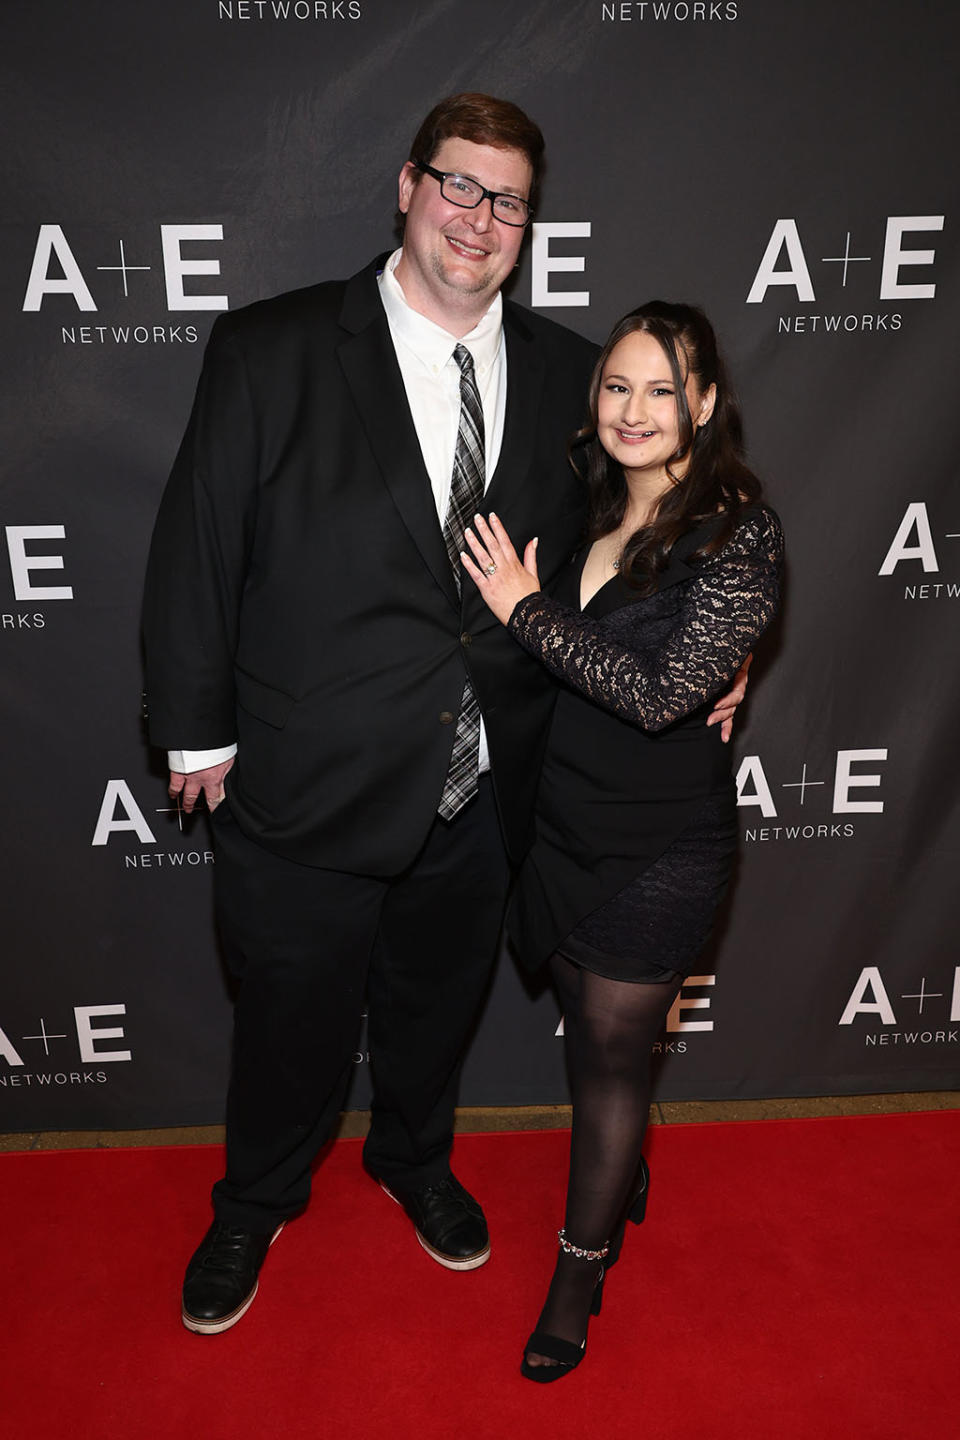 Ryan Anderson, Gypsy Rose Blanchard, "The Prison Confessions Of Gypsy Rose Blanchard," New York, lace, sandal heels, red carpet, crystalized